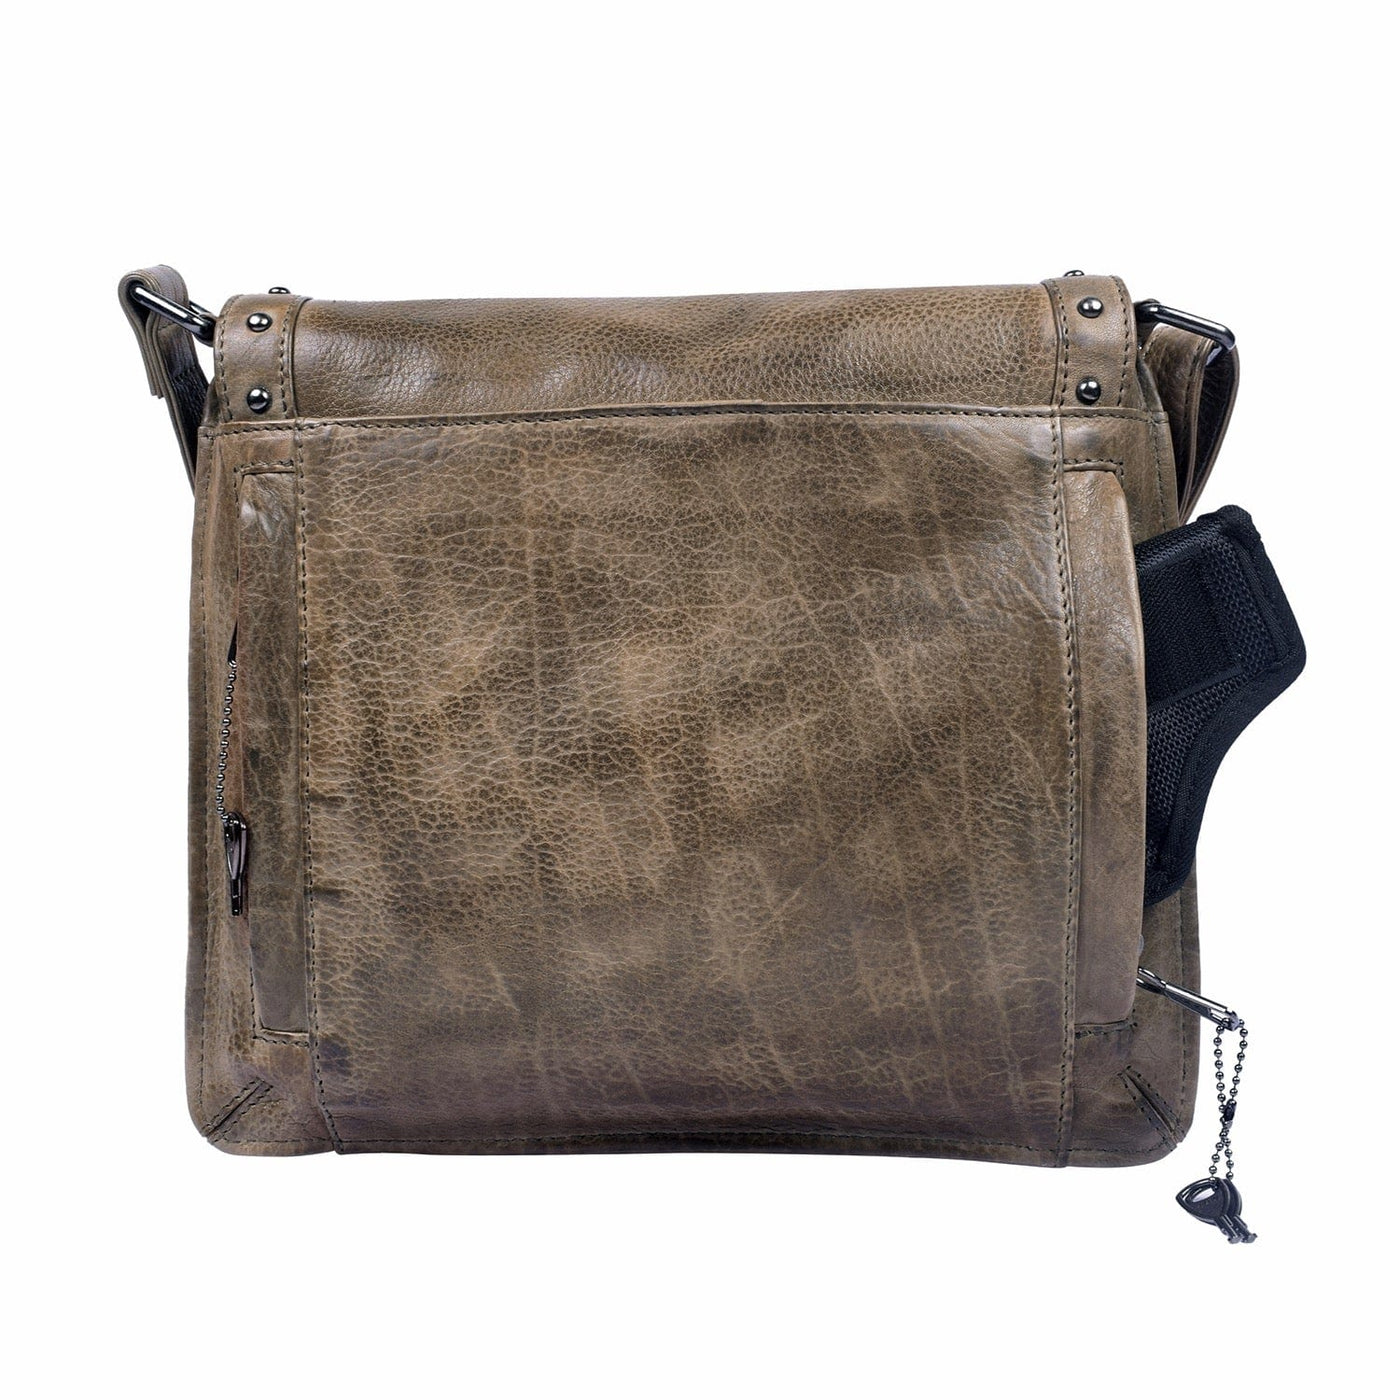 Concealed Carry Crossbody Purse -  Monroe Leather Purse by Lady Conceal - Tactical Pistol Women's Handbag -  YKK Locking and Universal Holster -   Designer Concealed Carry Bag -  Soft Leather conceal and carry bag -  Tactical womans purse for pistol -  Concealed Carry Purse -  most popular crossbody bag -  crossbody handgun bag -  crossbody bags for everyday use -  Lady Conceal -  Unique Hide Purse -  Locking YKK Purse -  Fanny Pack for Gun and Pistol -  Easy CCW -  Fast Draw Bag -  Secure Gun Bag